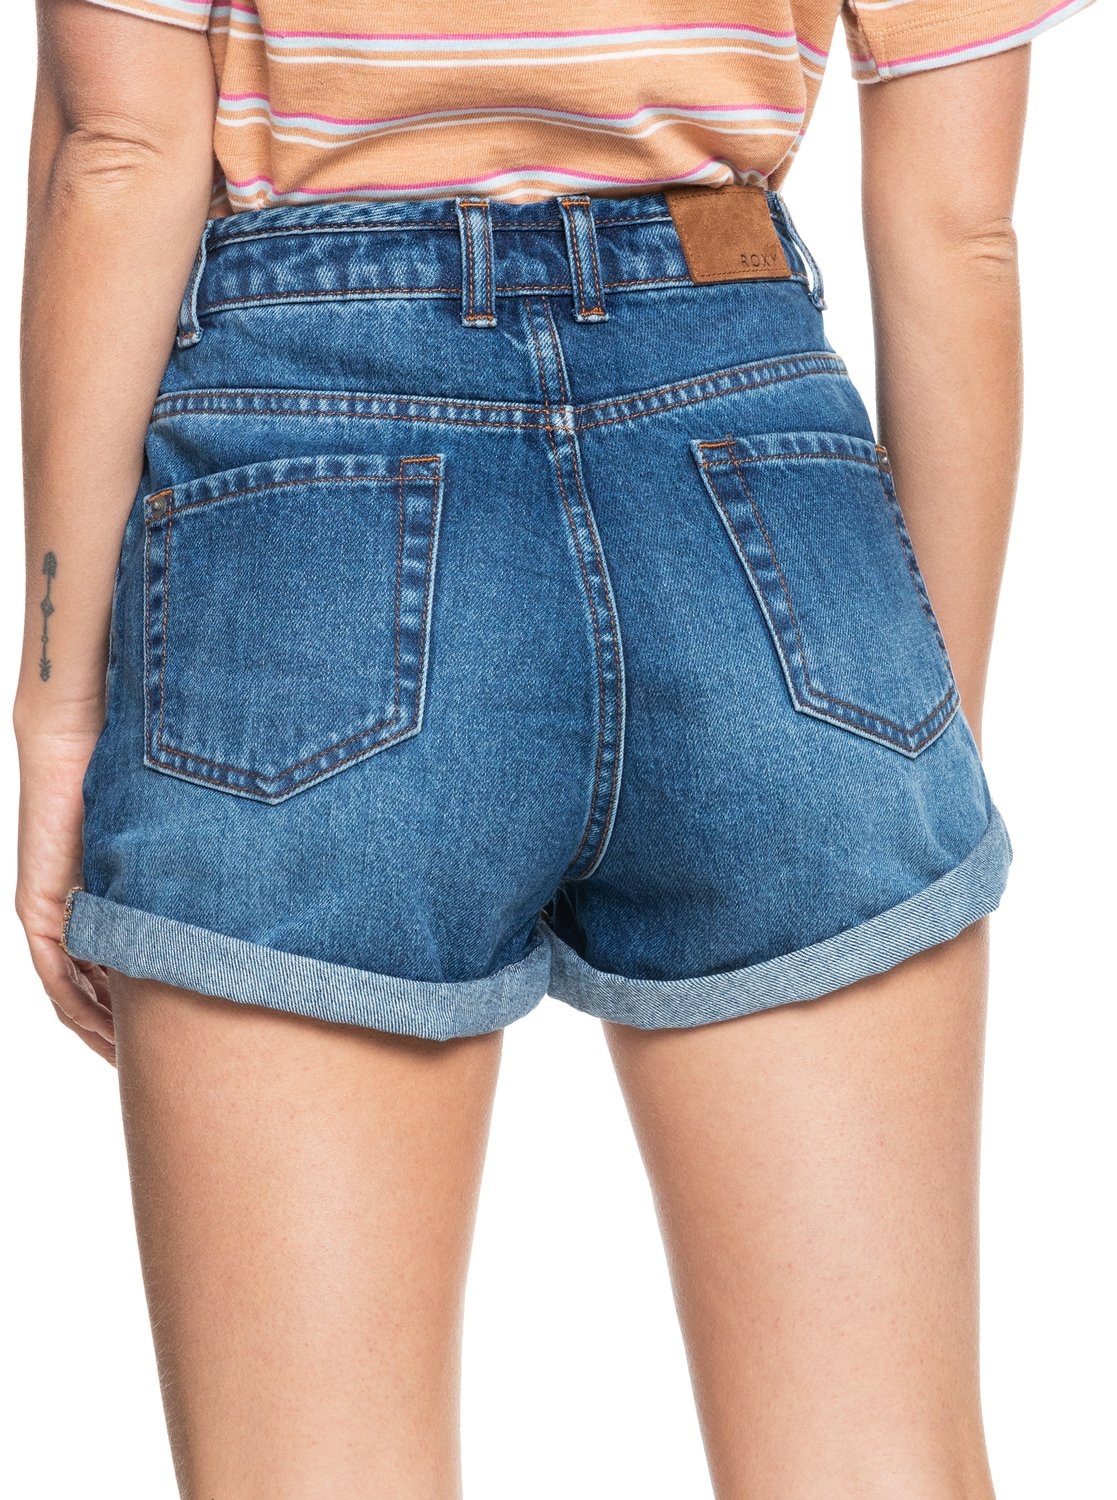 Roxy Jeansshorts »Authentic Summer High« online bei OTTO